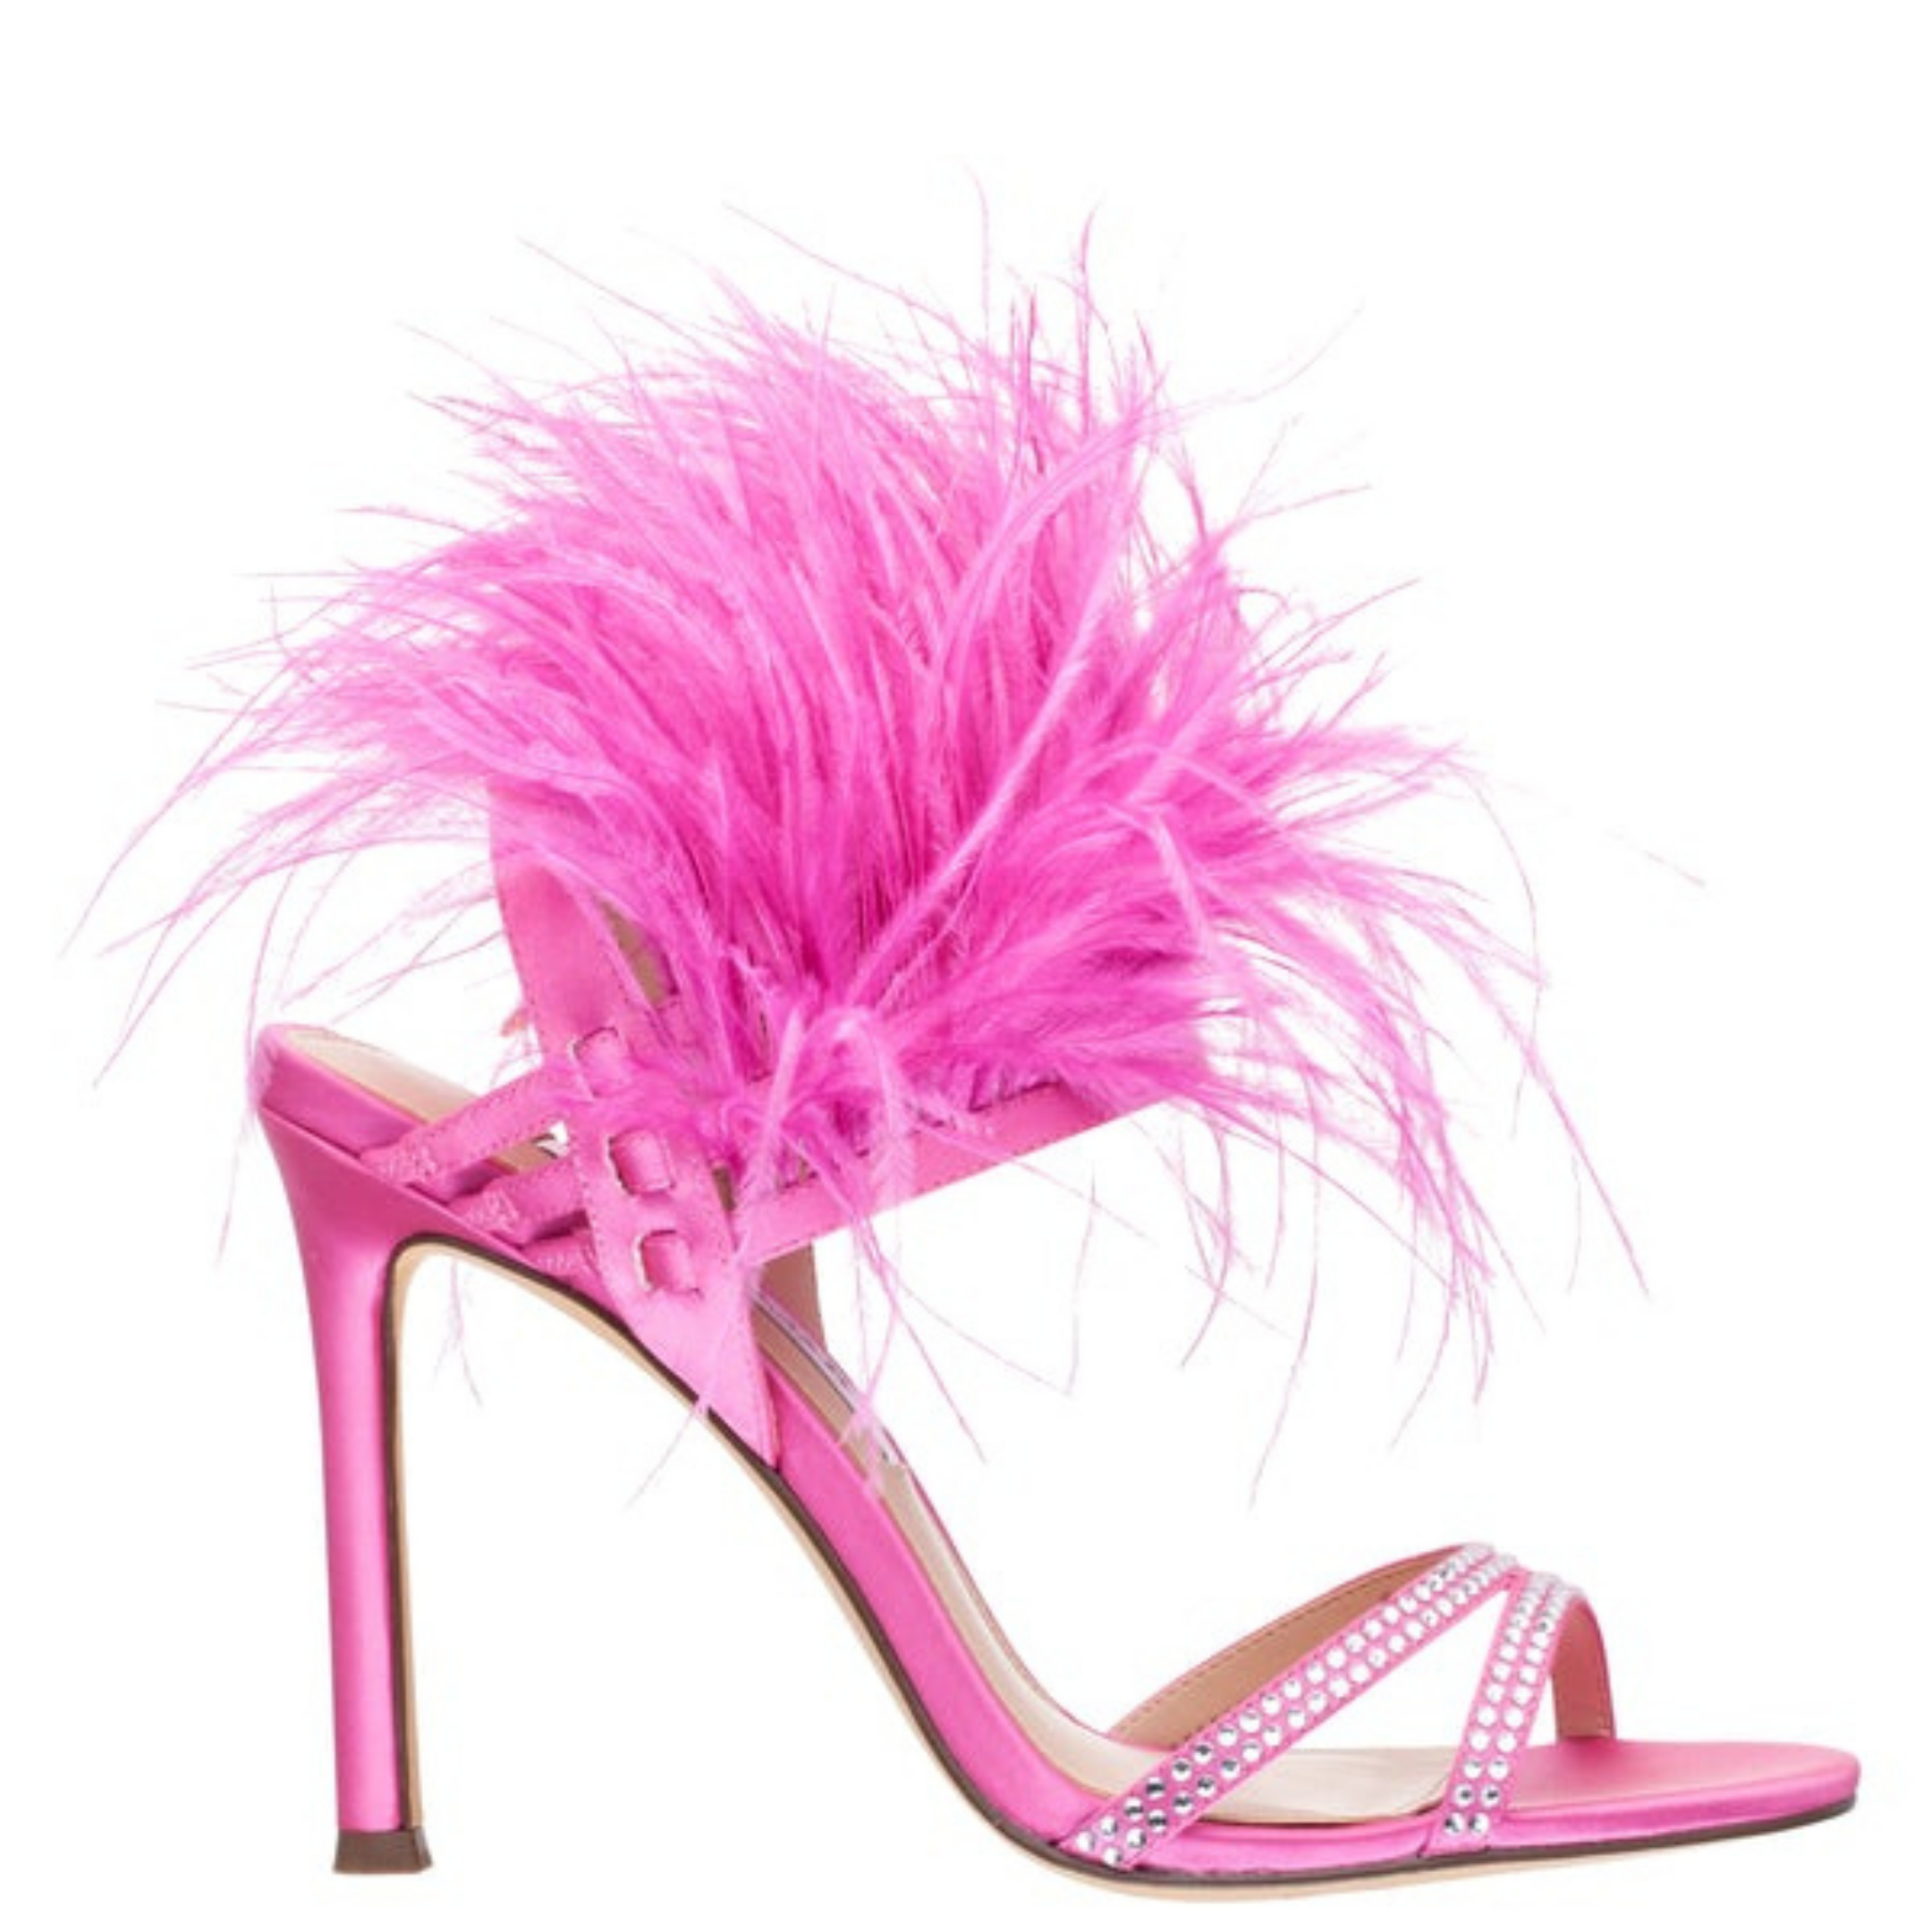 15 Shoes To Complete Your Valentine's Day Outfit